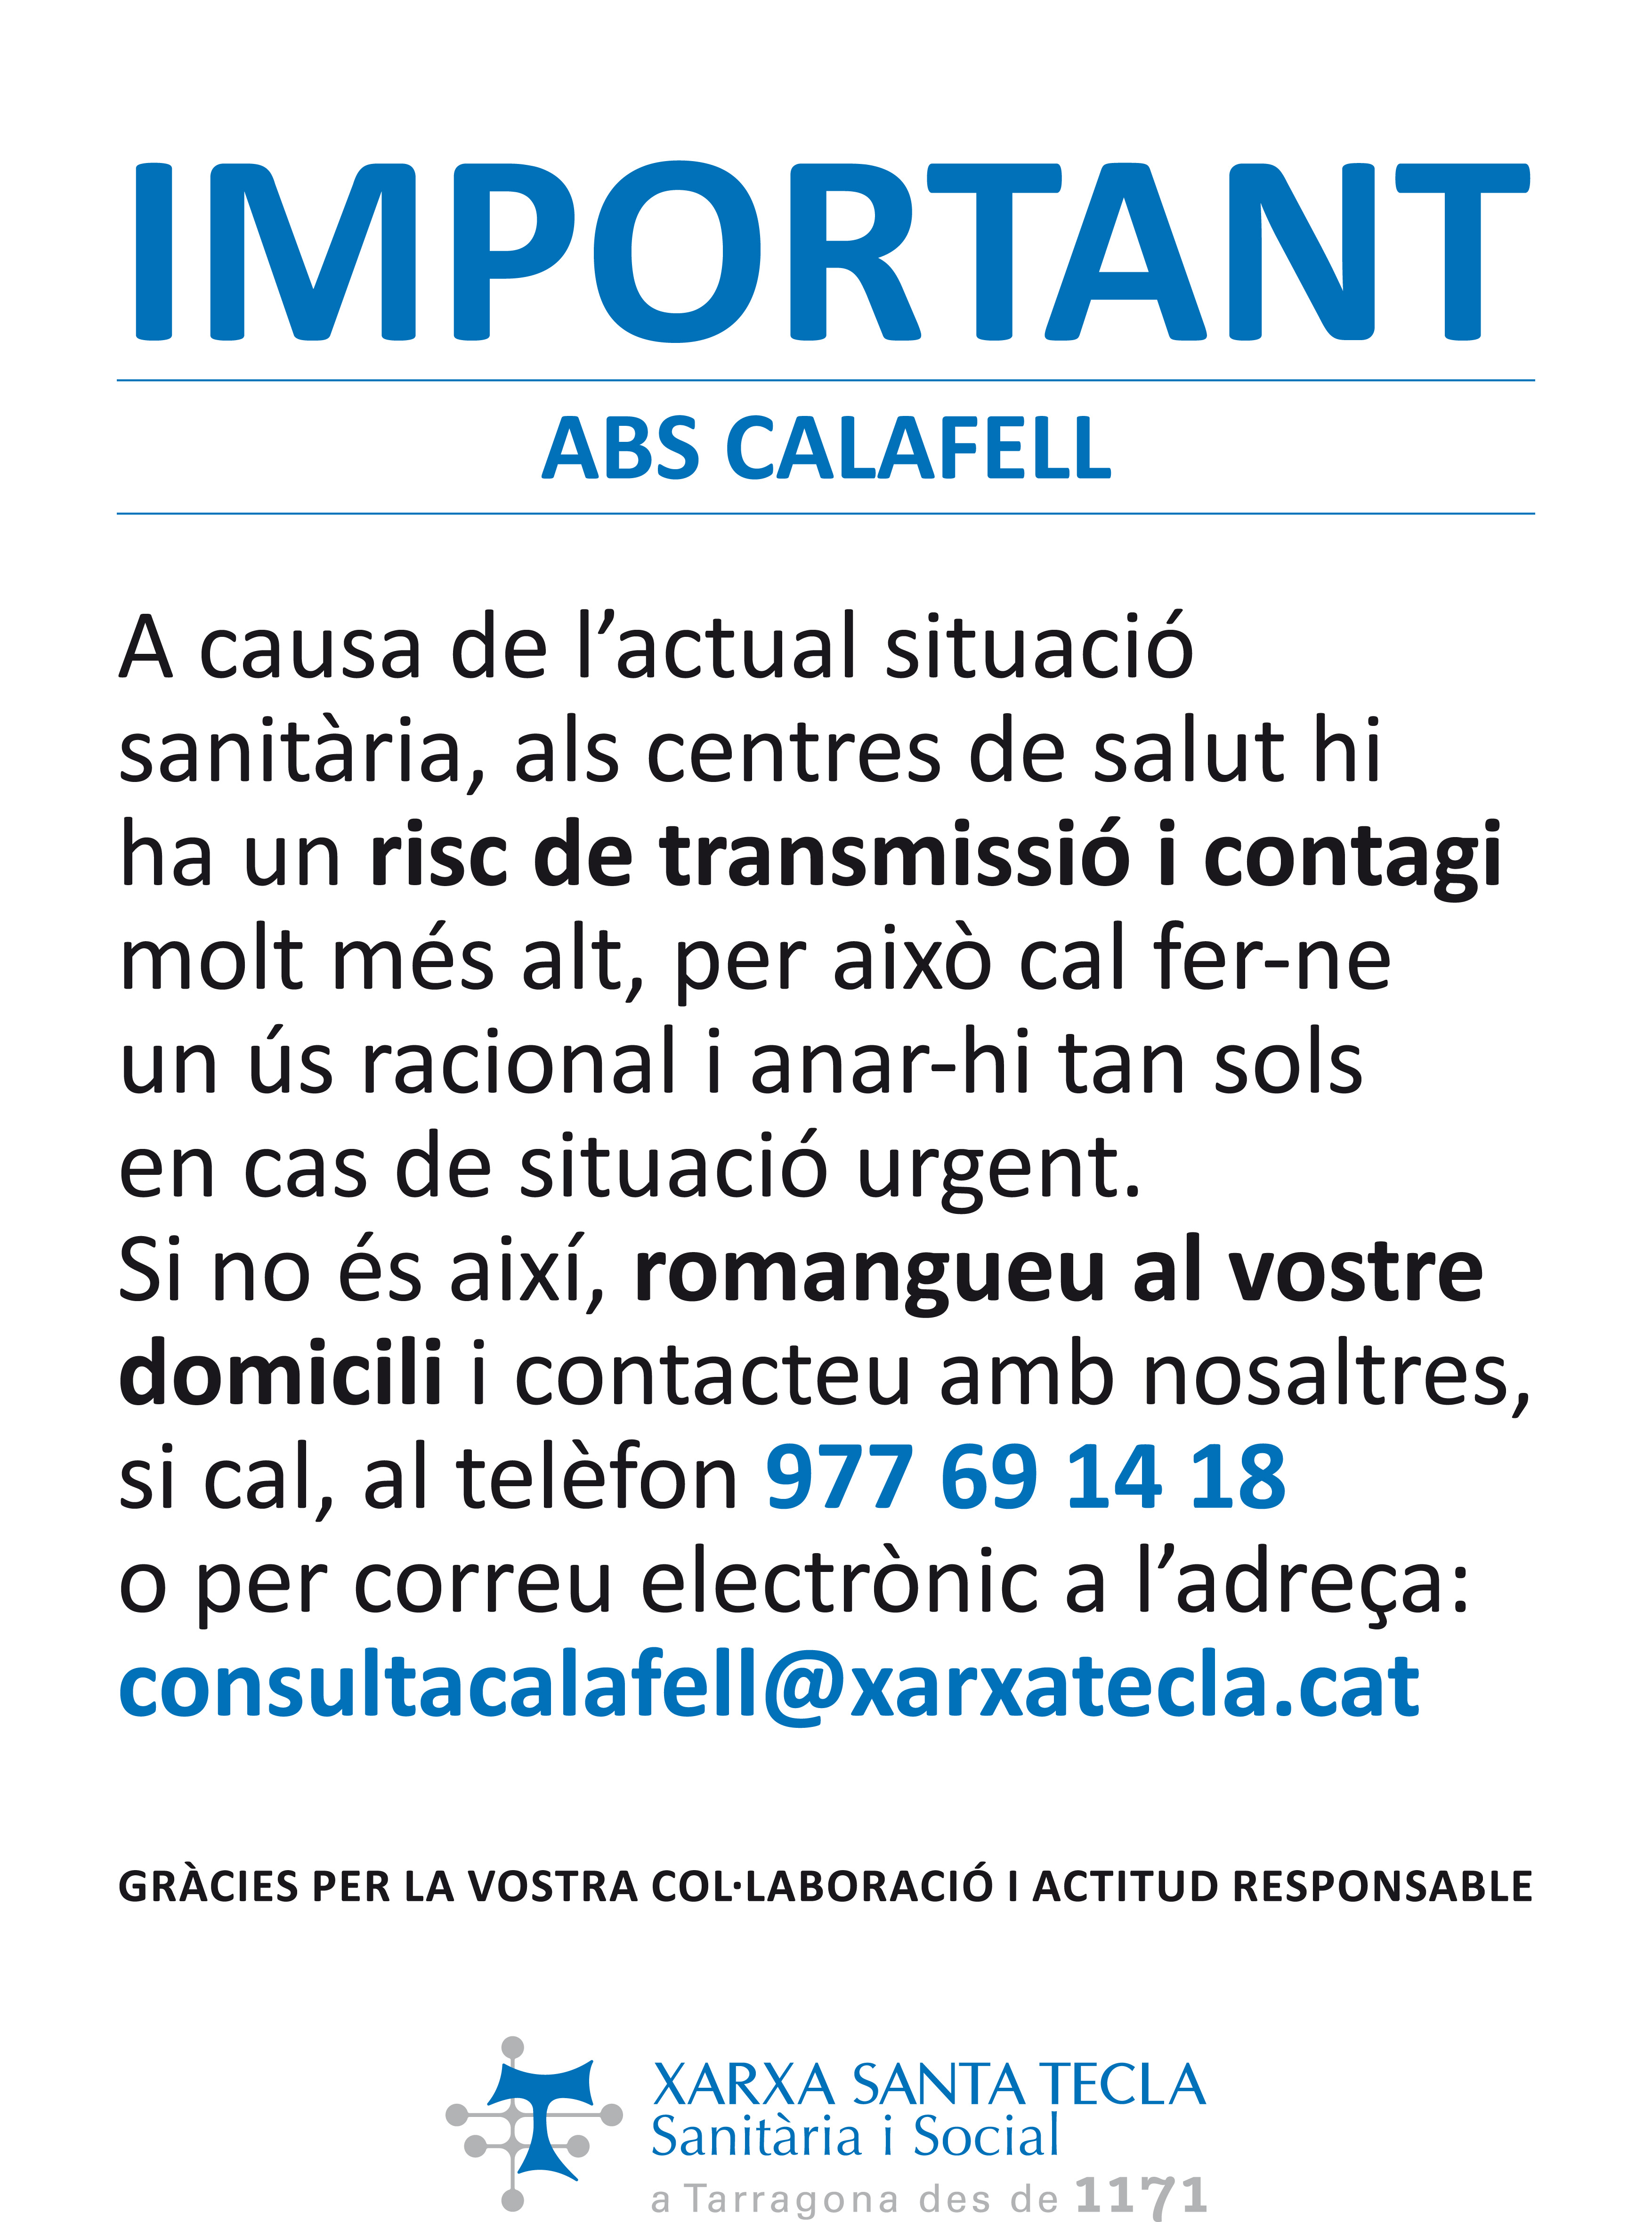 abs calafell